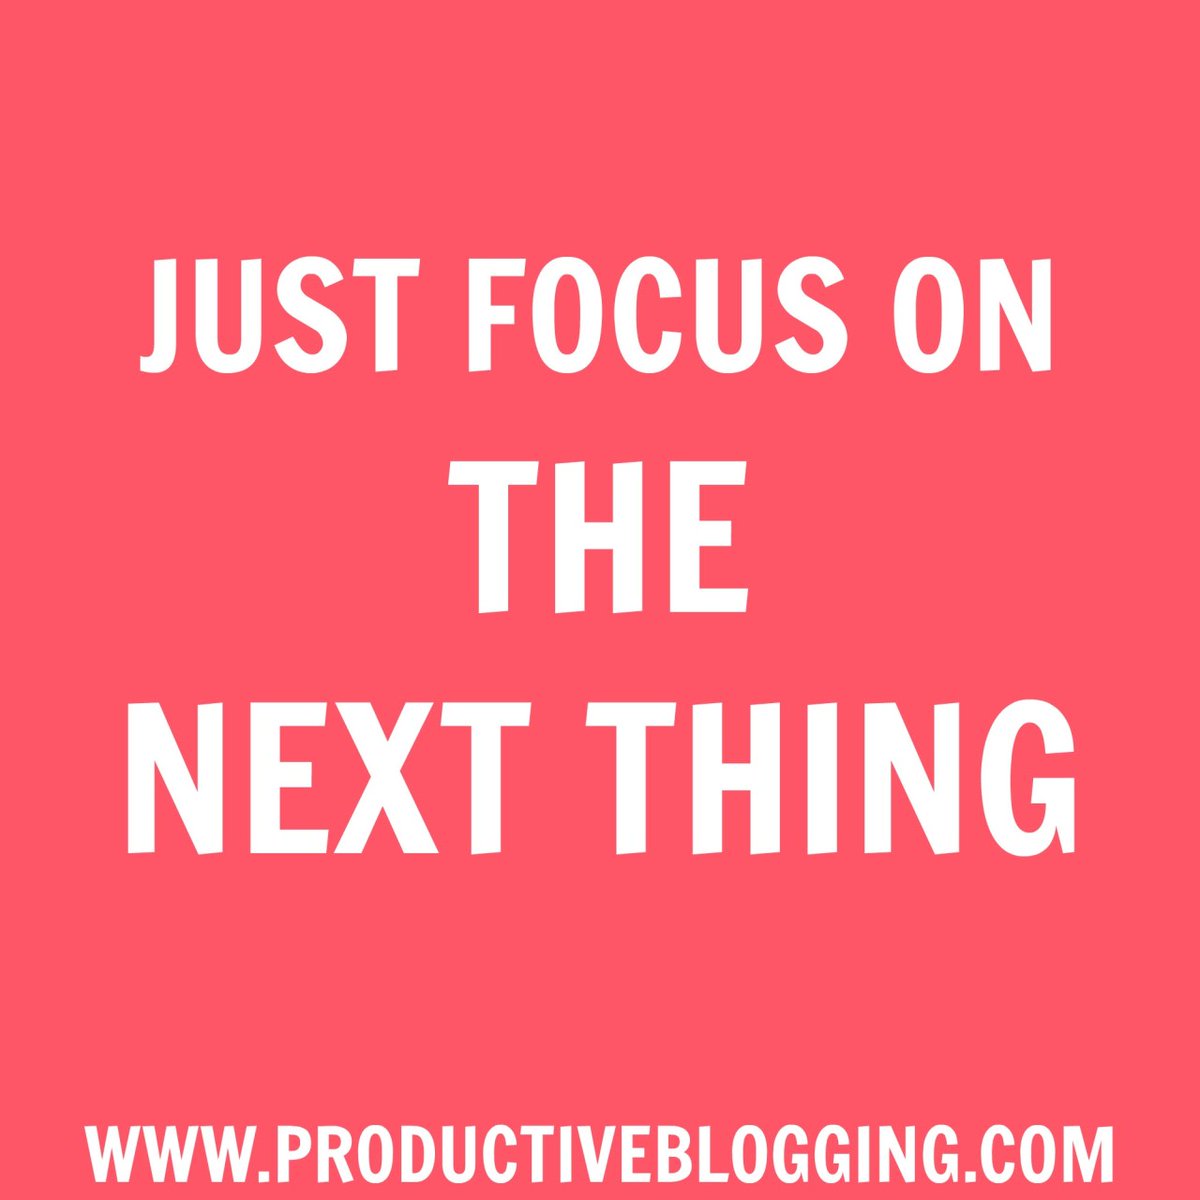 It's so easy to stress and worry about #allthethings

STOP!!! 

Write down all the things

Then decide what you actually NEED to do today/this week

Then just focus on #thenextthing

#productivityhacks #productivitytips #productivityhabits #productiveblogging #mondaymotivation